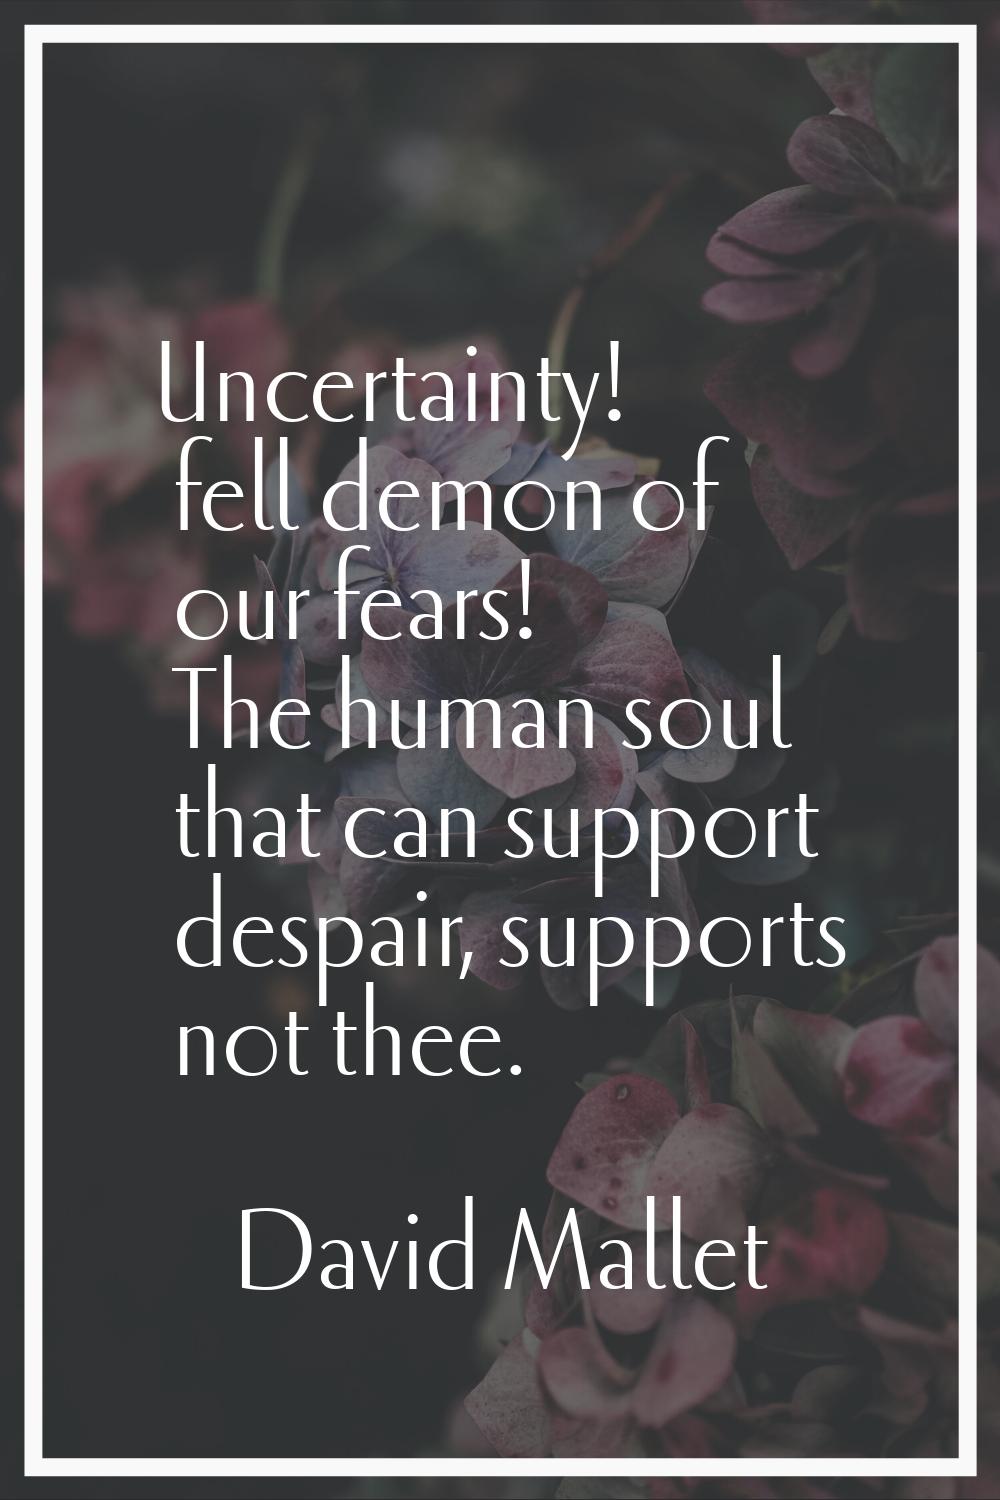 Uncertainty! fell demon of our fears! The human soul that can support despair, supports not thee.